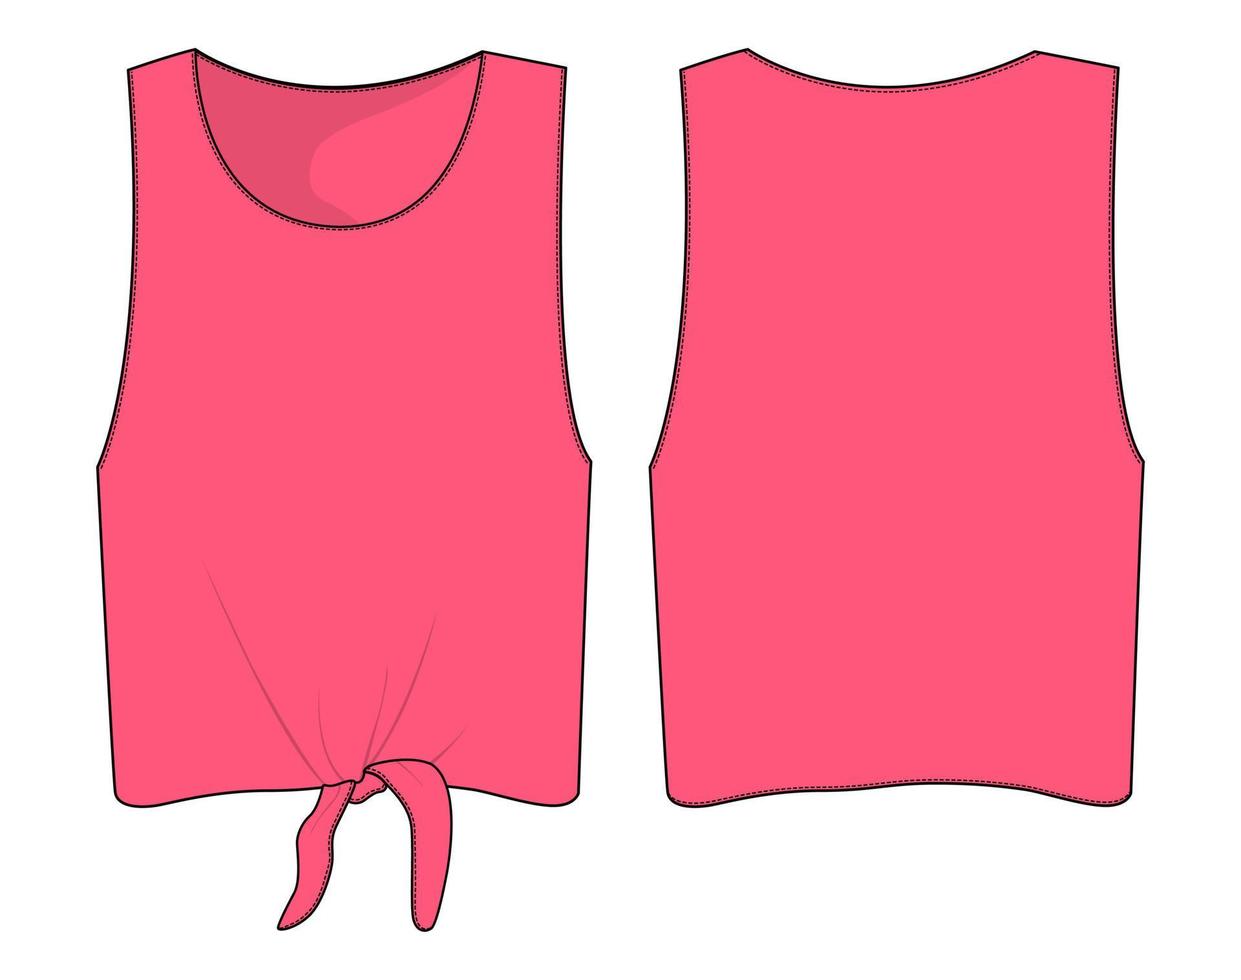 Sleeveless Ladies tops technical fashion flat sketch vector illustration template front and back